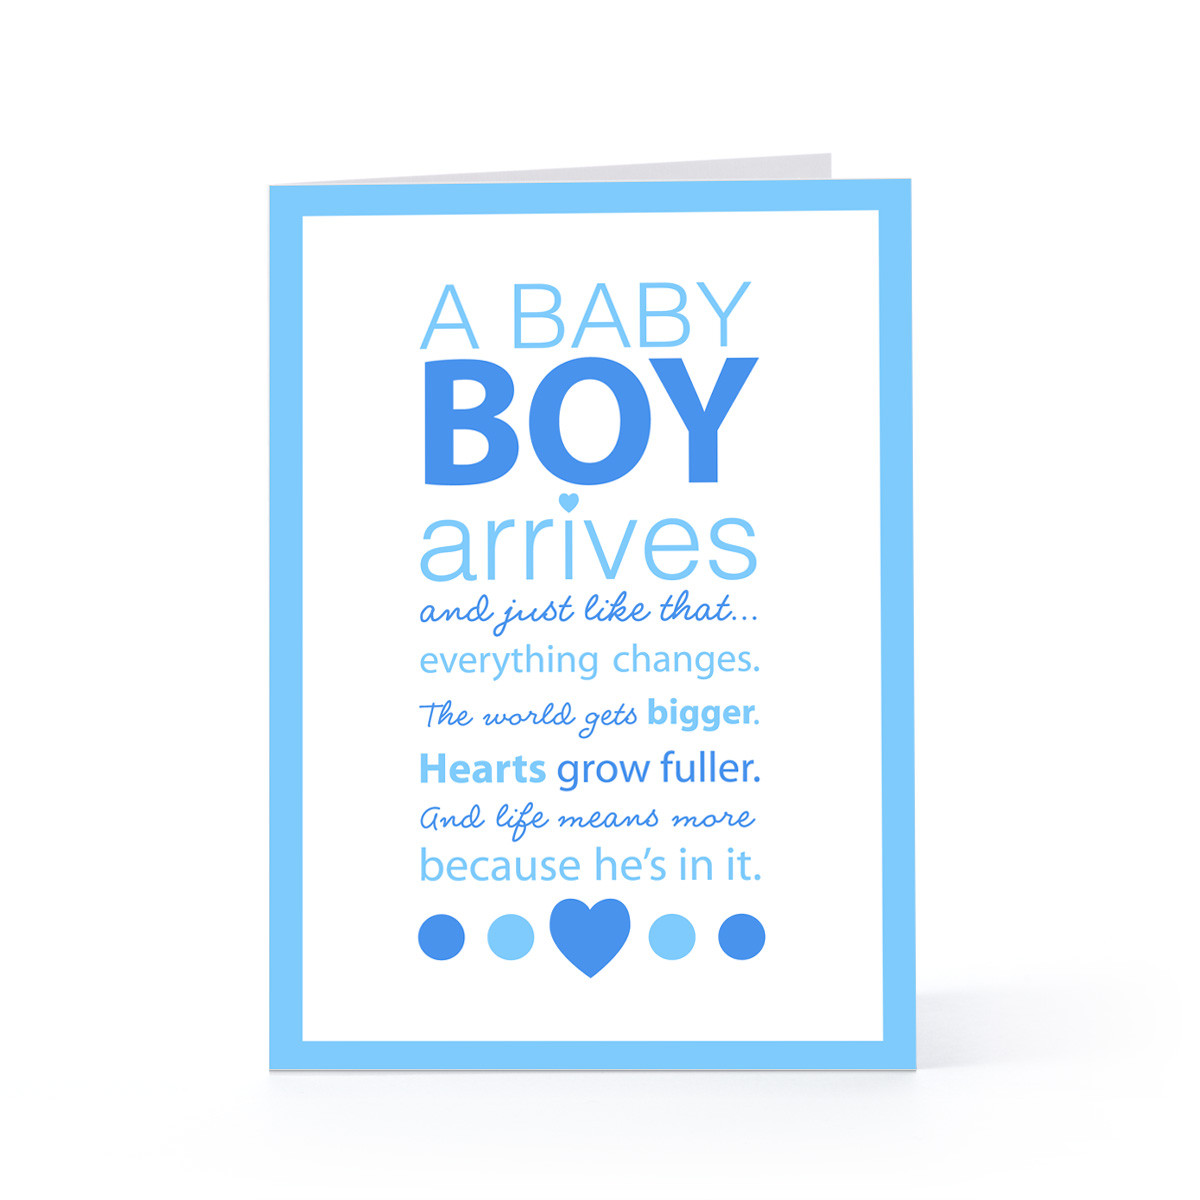 Quotes About Having A Baby Boy
 Baby Boy Birth Quotes QuotesGram